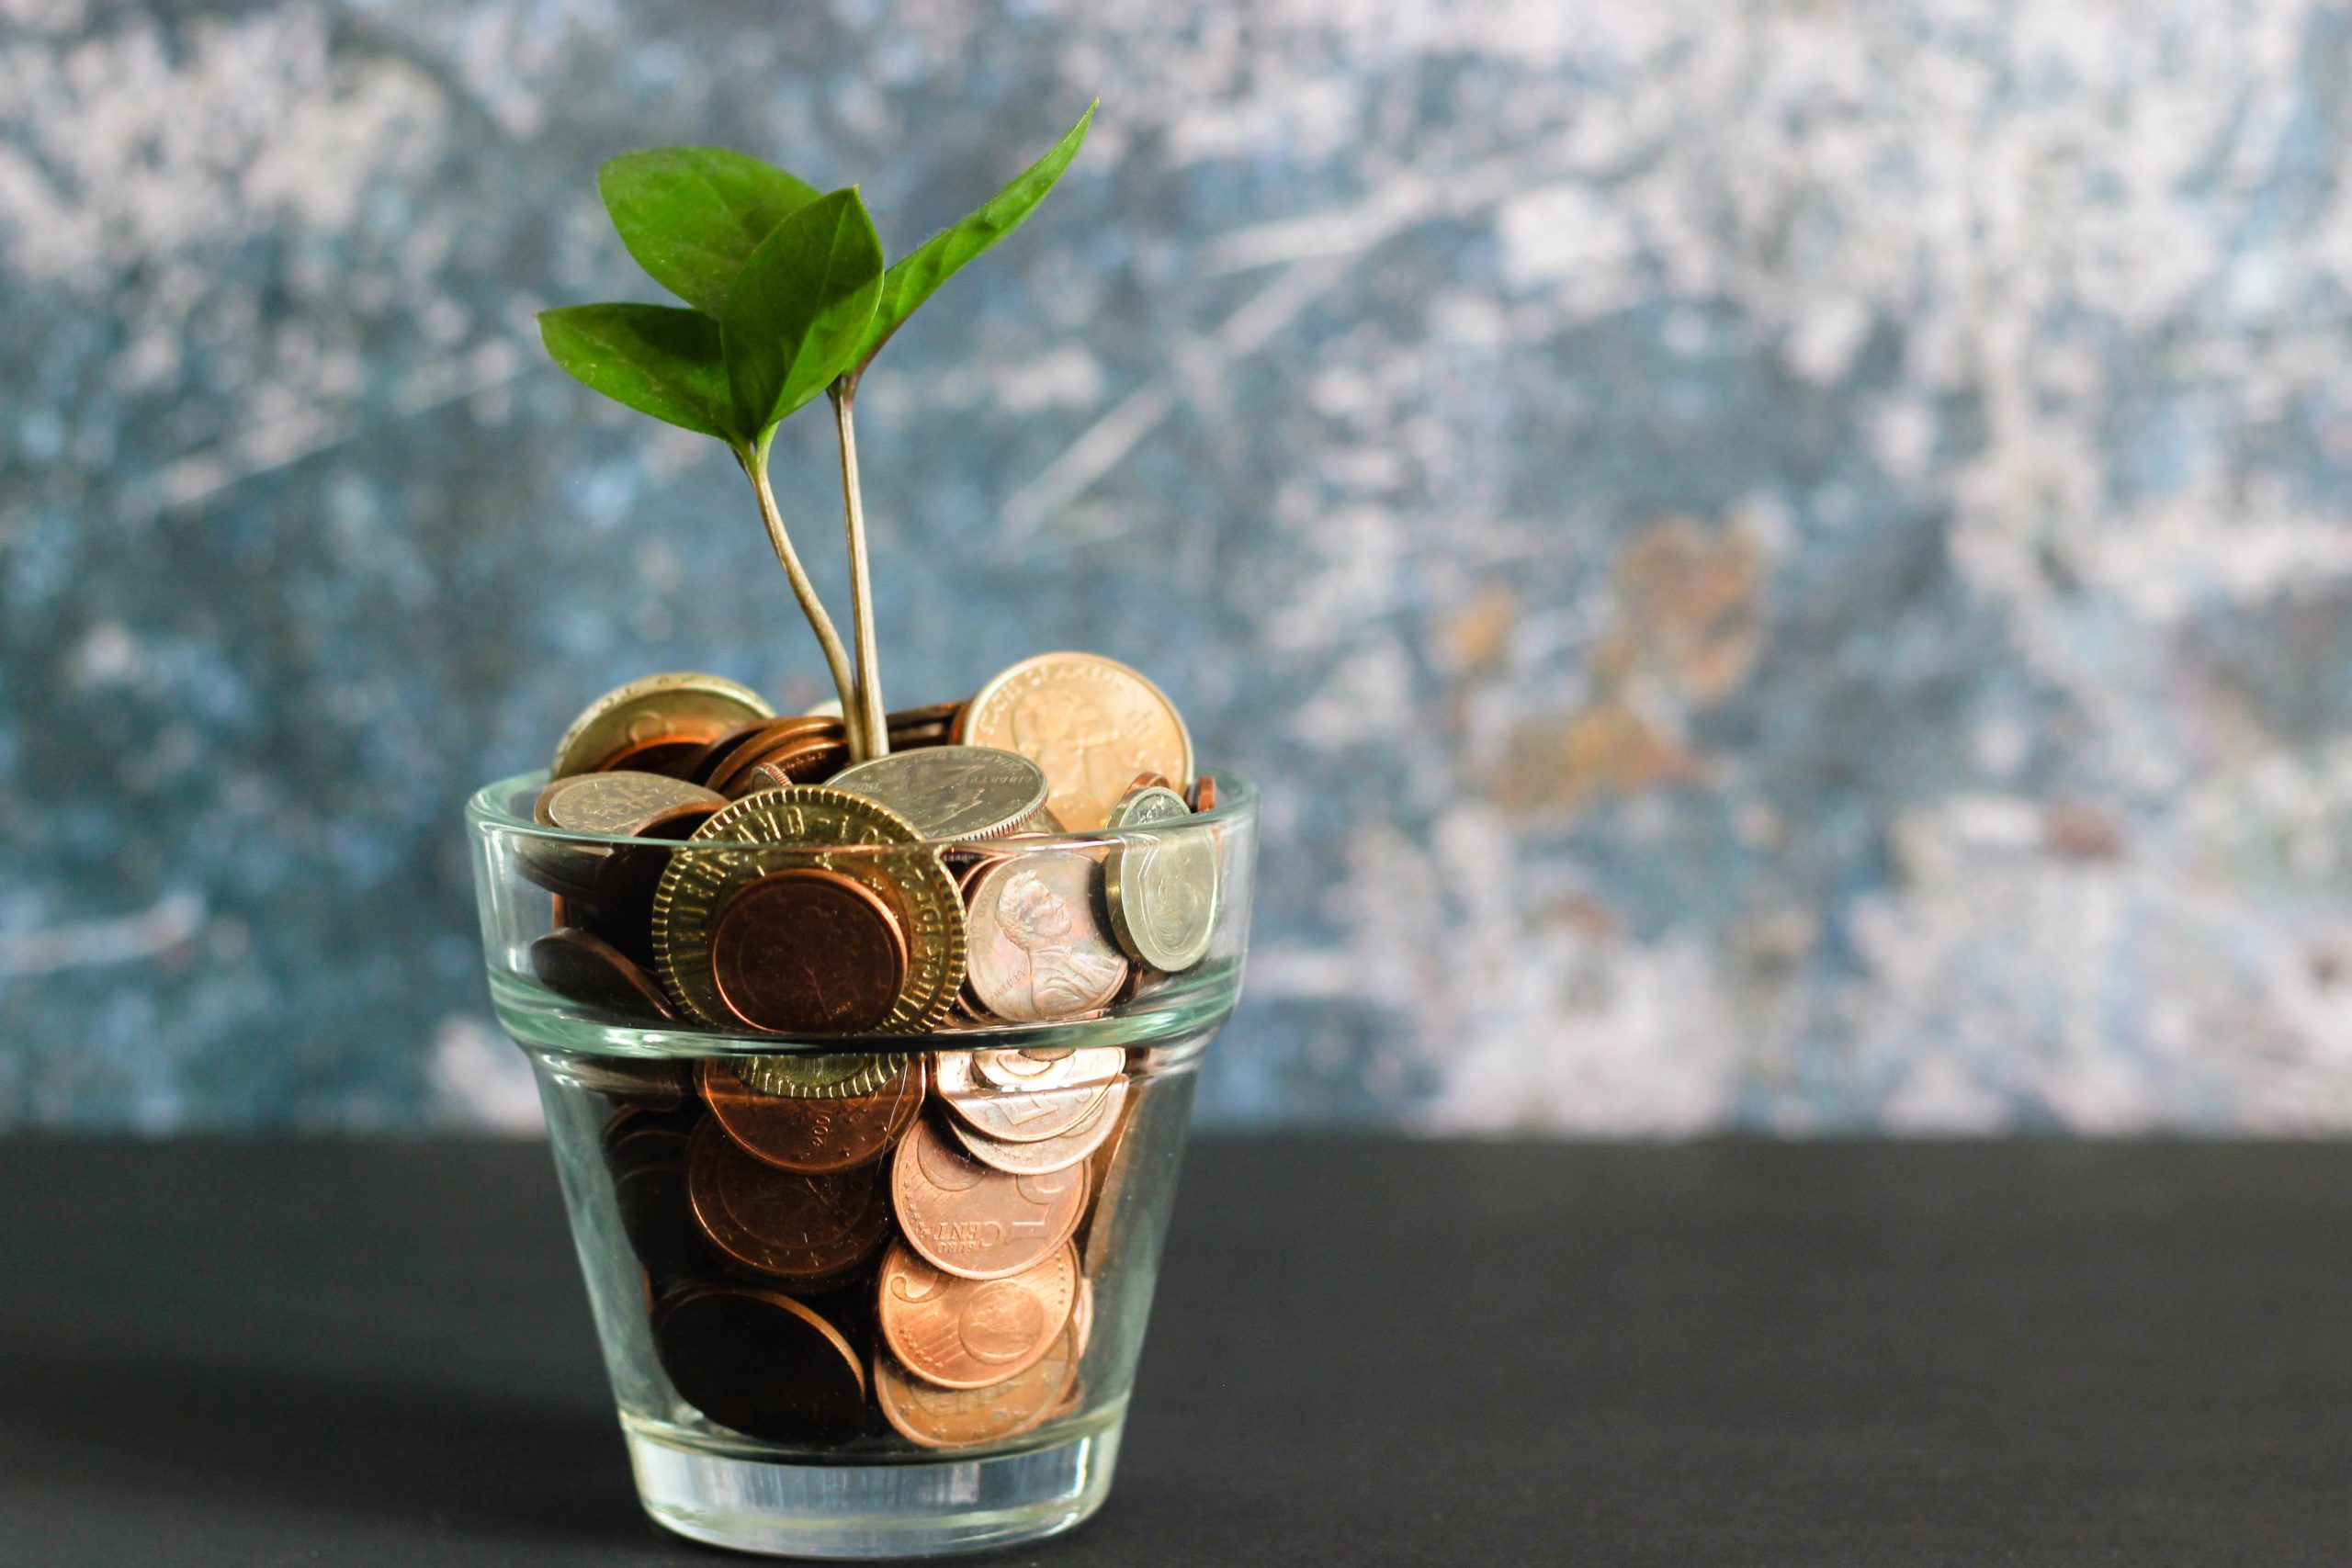 Glass of coins with a small green sprout.